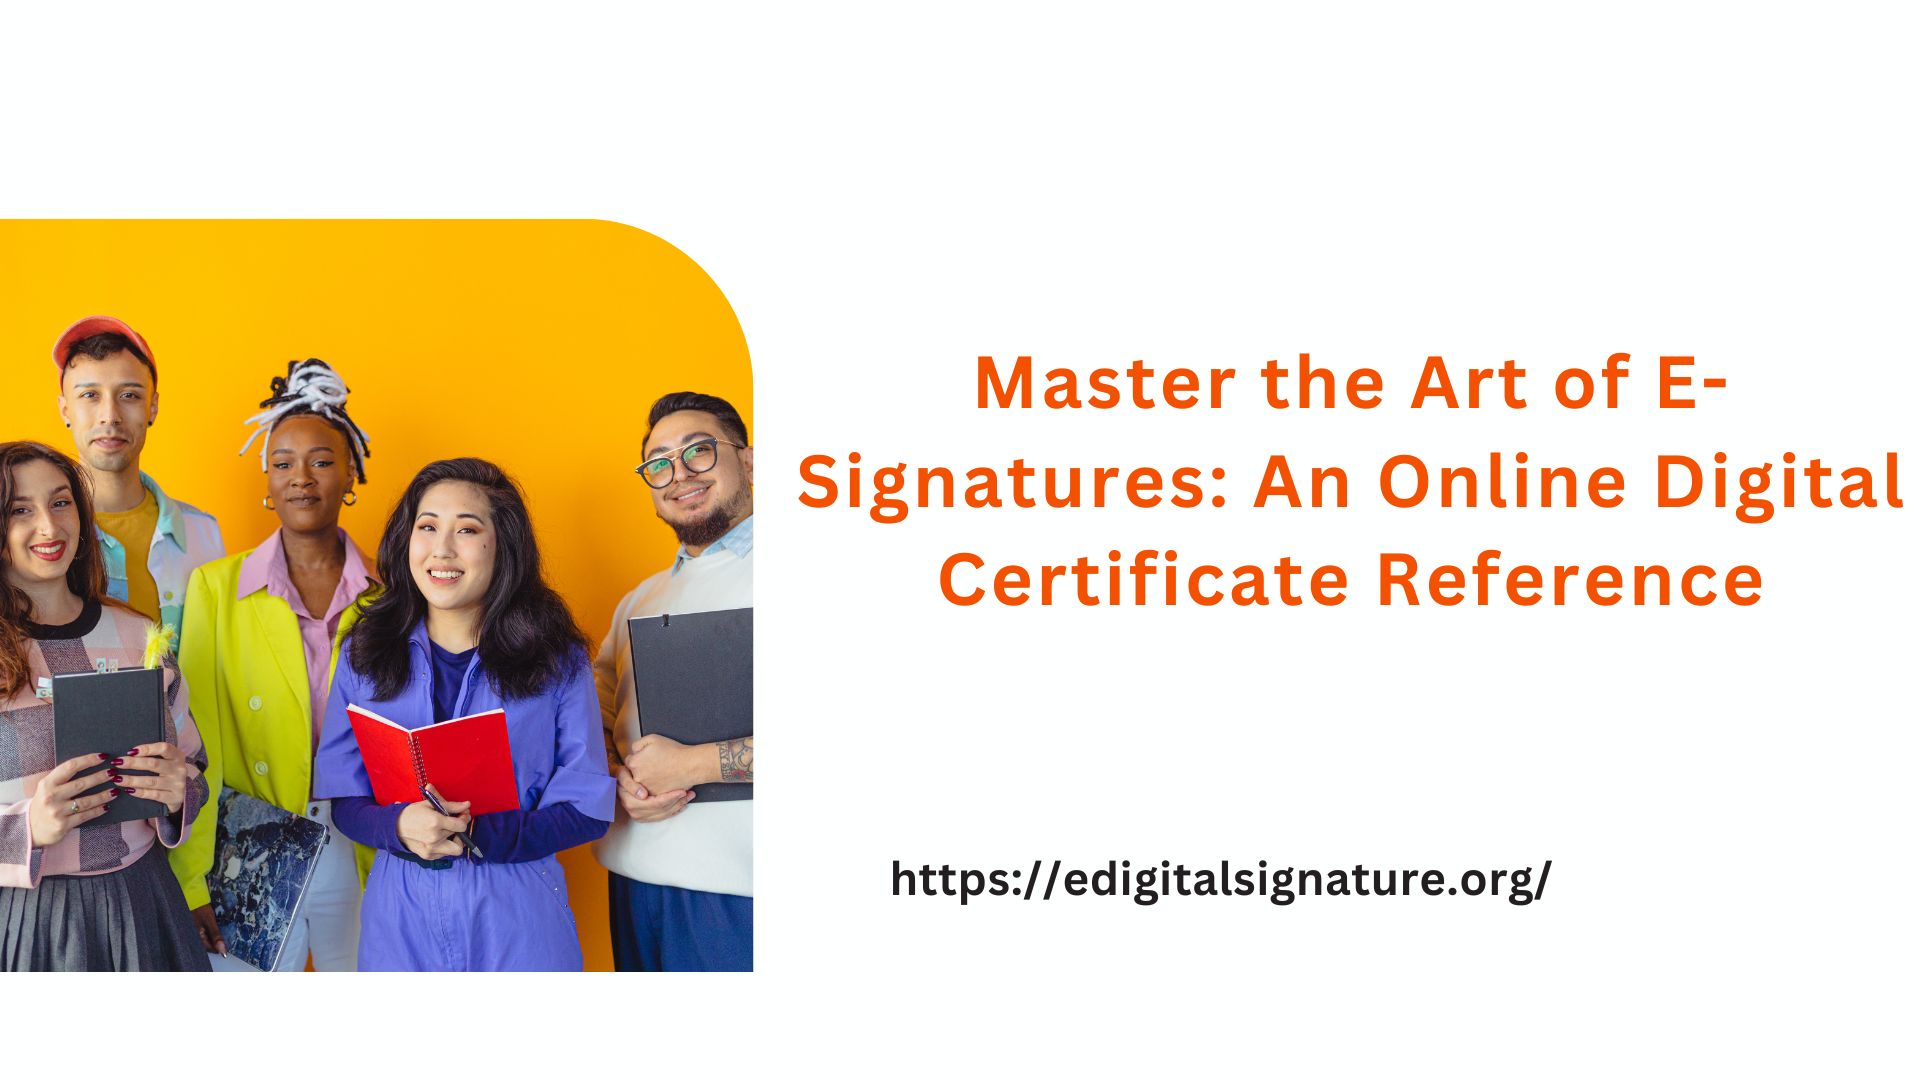 Master the Art of E-Signatures: An Online Digital Certificate Reference